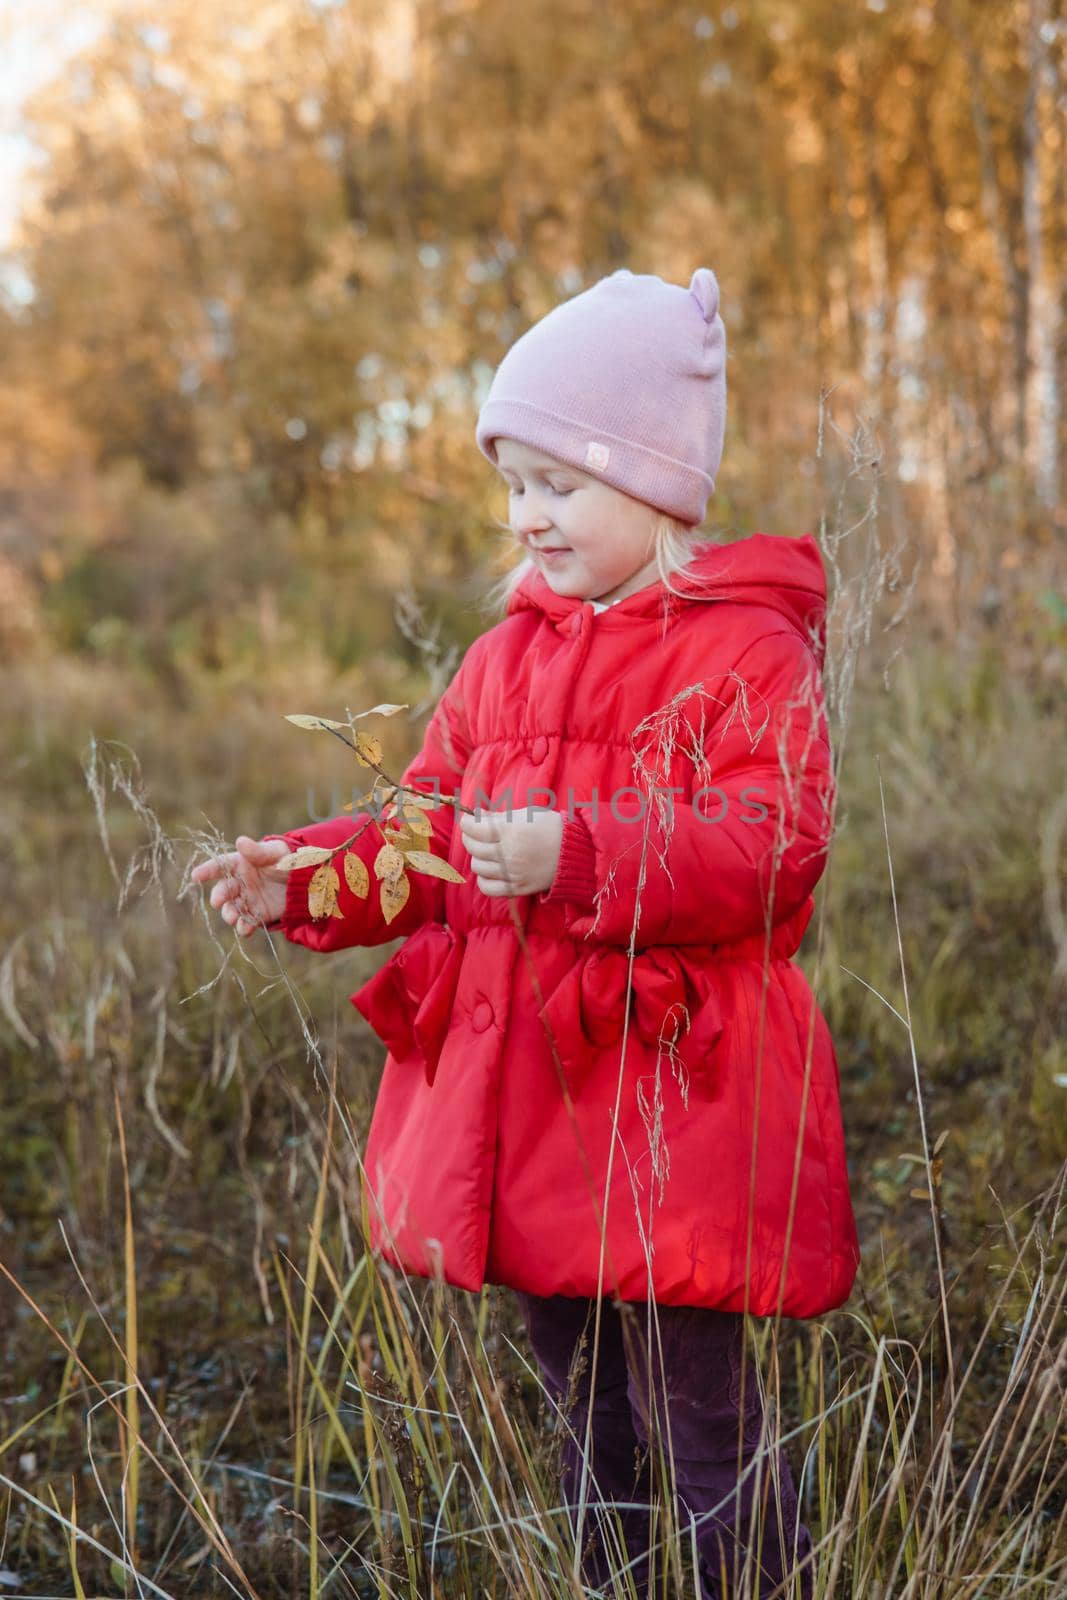 A little girl in a red coat walks in nature in an autumn grove. The season is autumn.